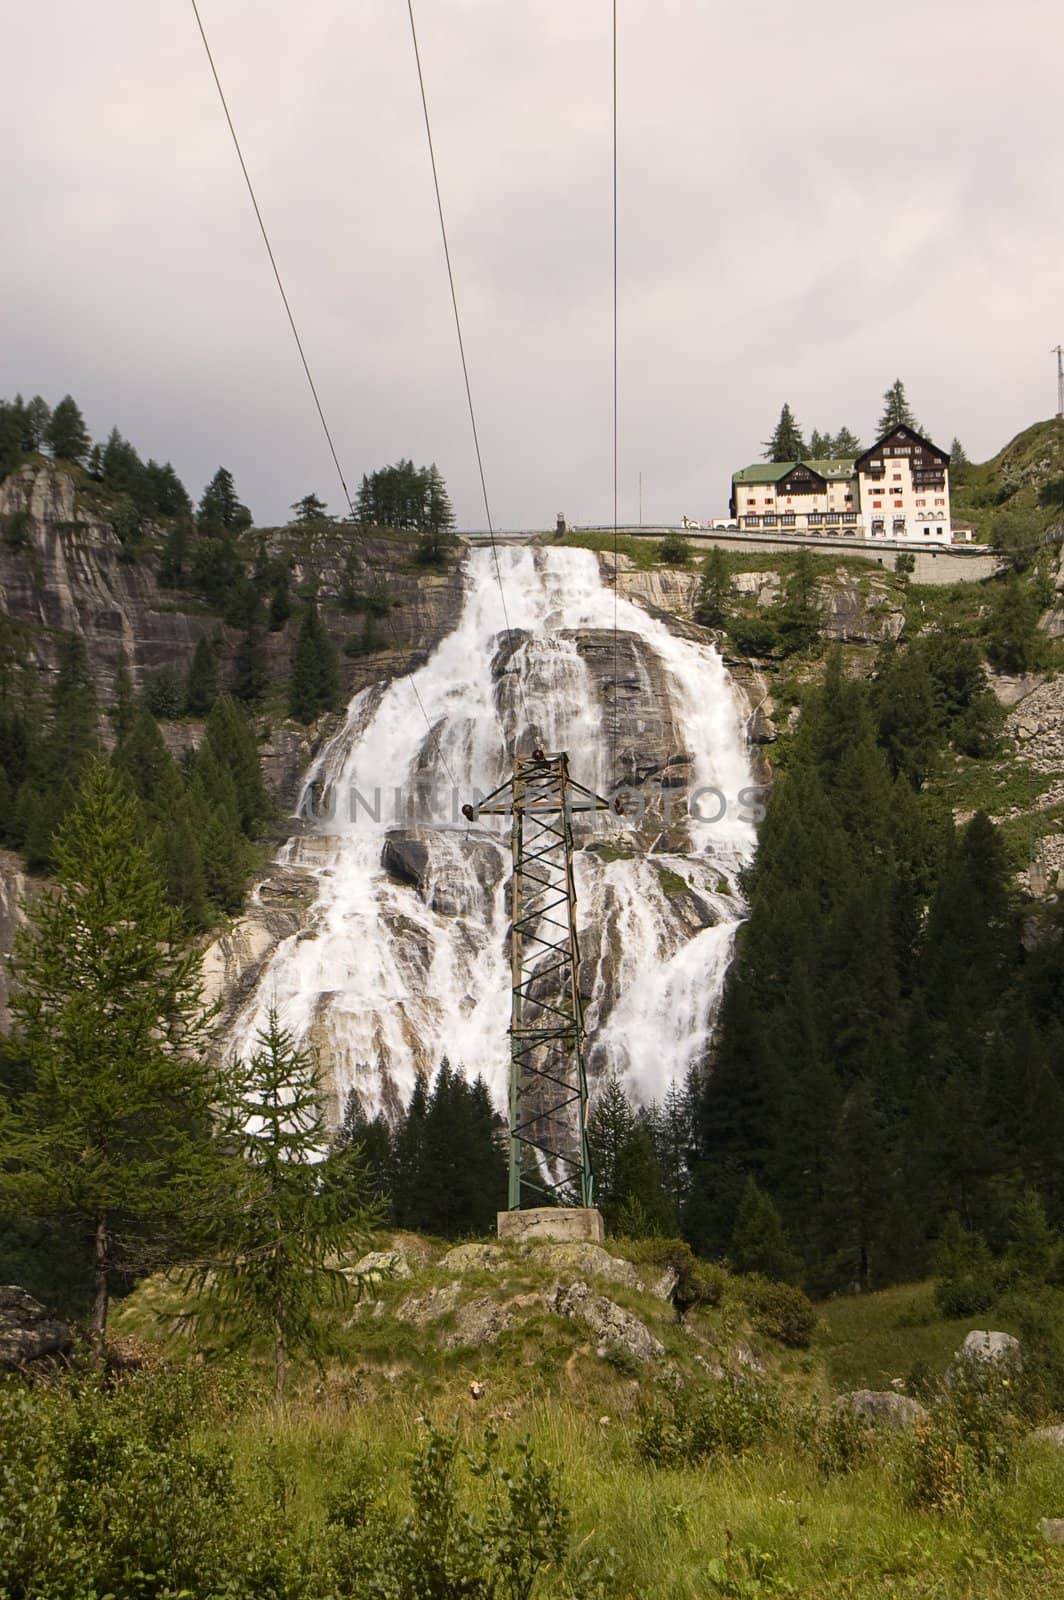 The Toce Waterfall used for hydroelectric purposes, Val Formazza, Italy